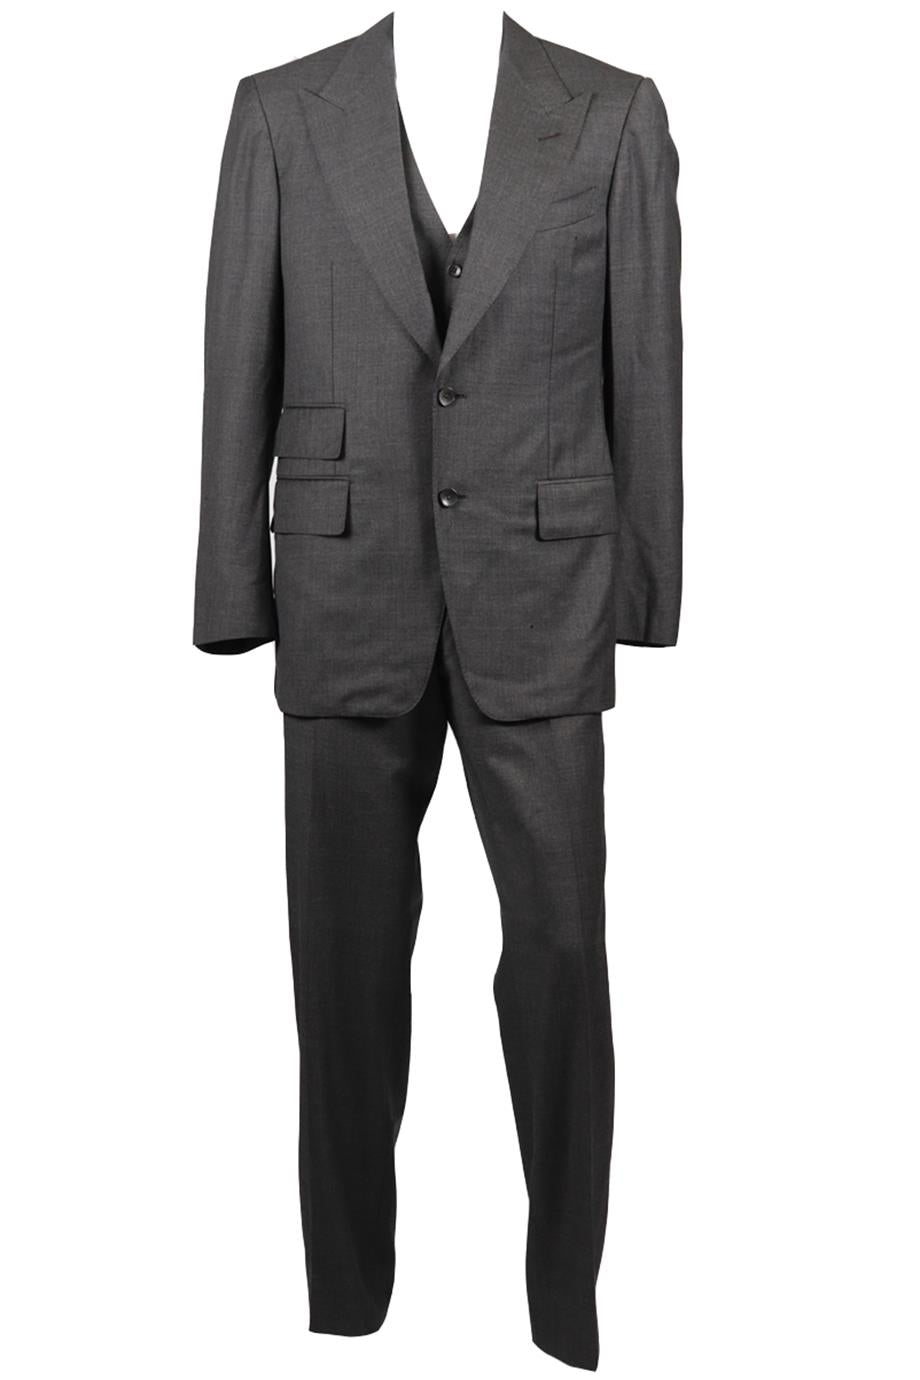 TOM FORD MEN'S WOOL THREE PIECE SUIT IT 50 UK/US CHEST 40